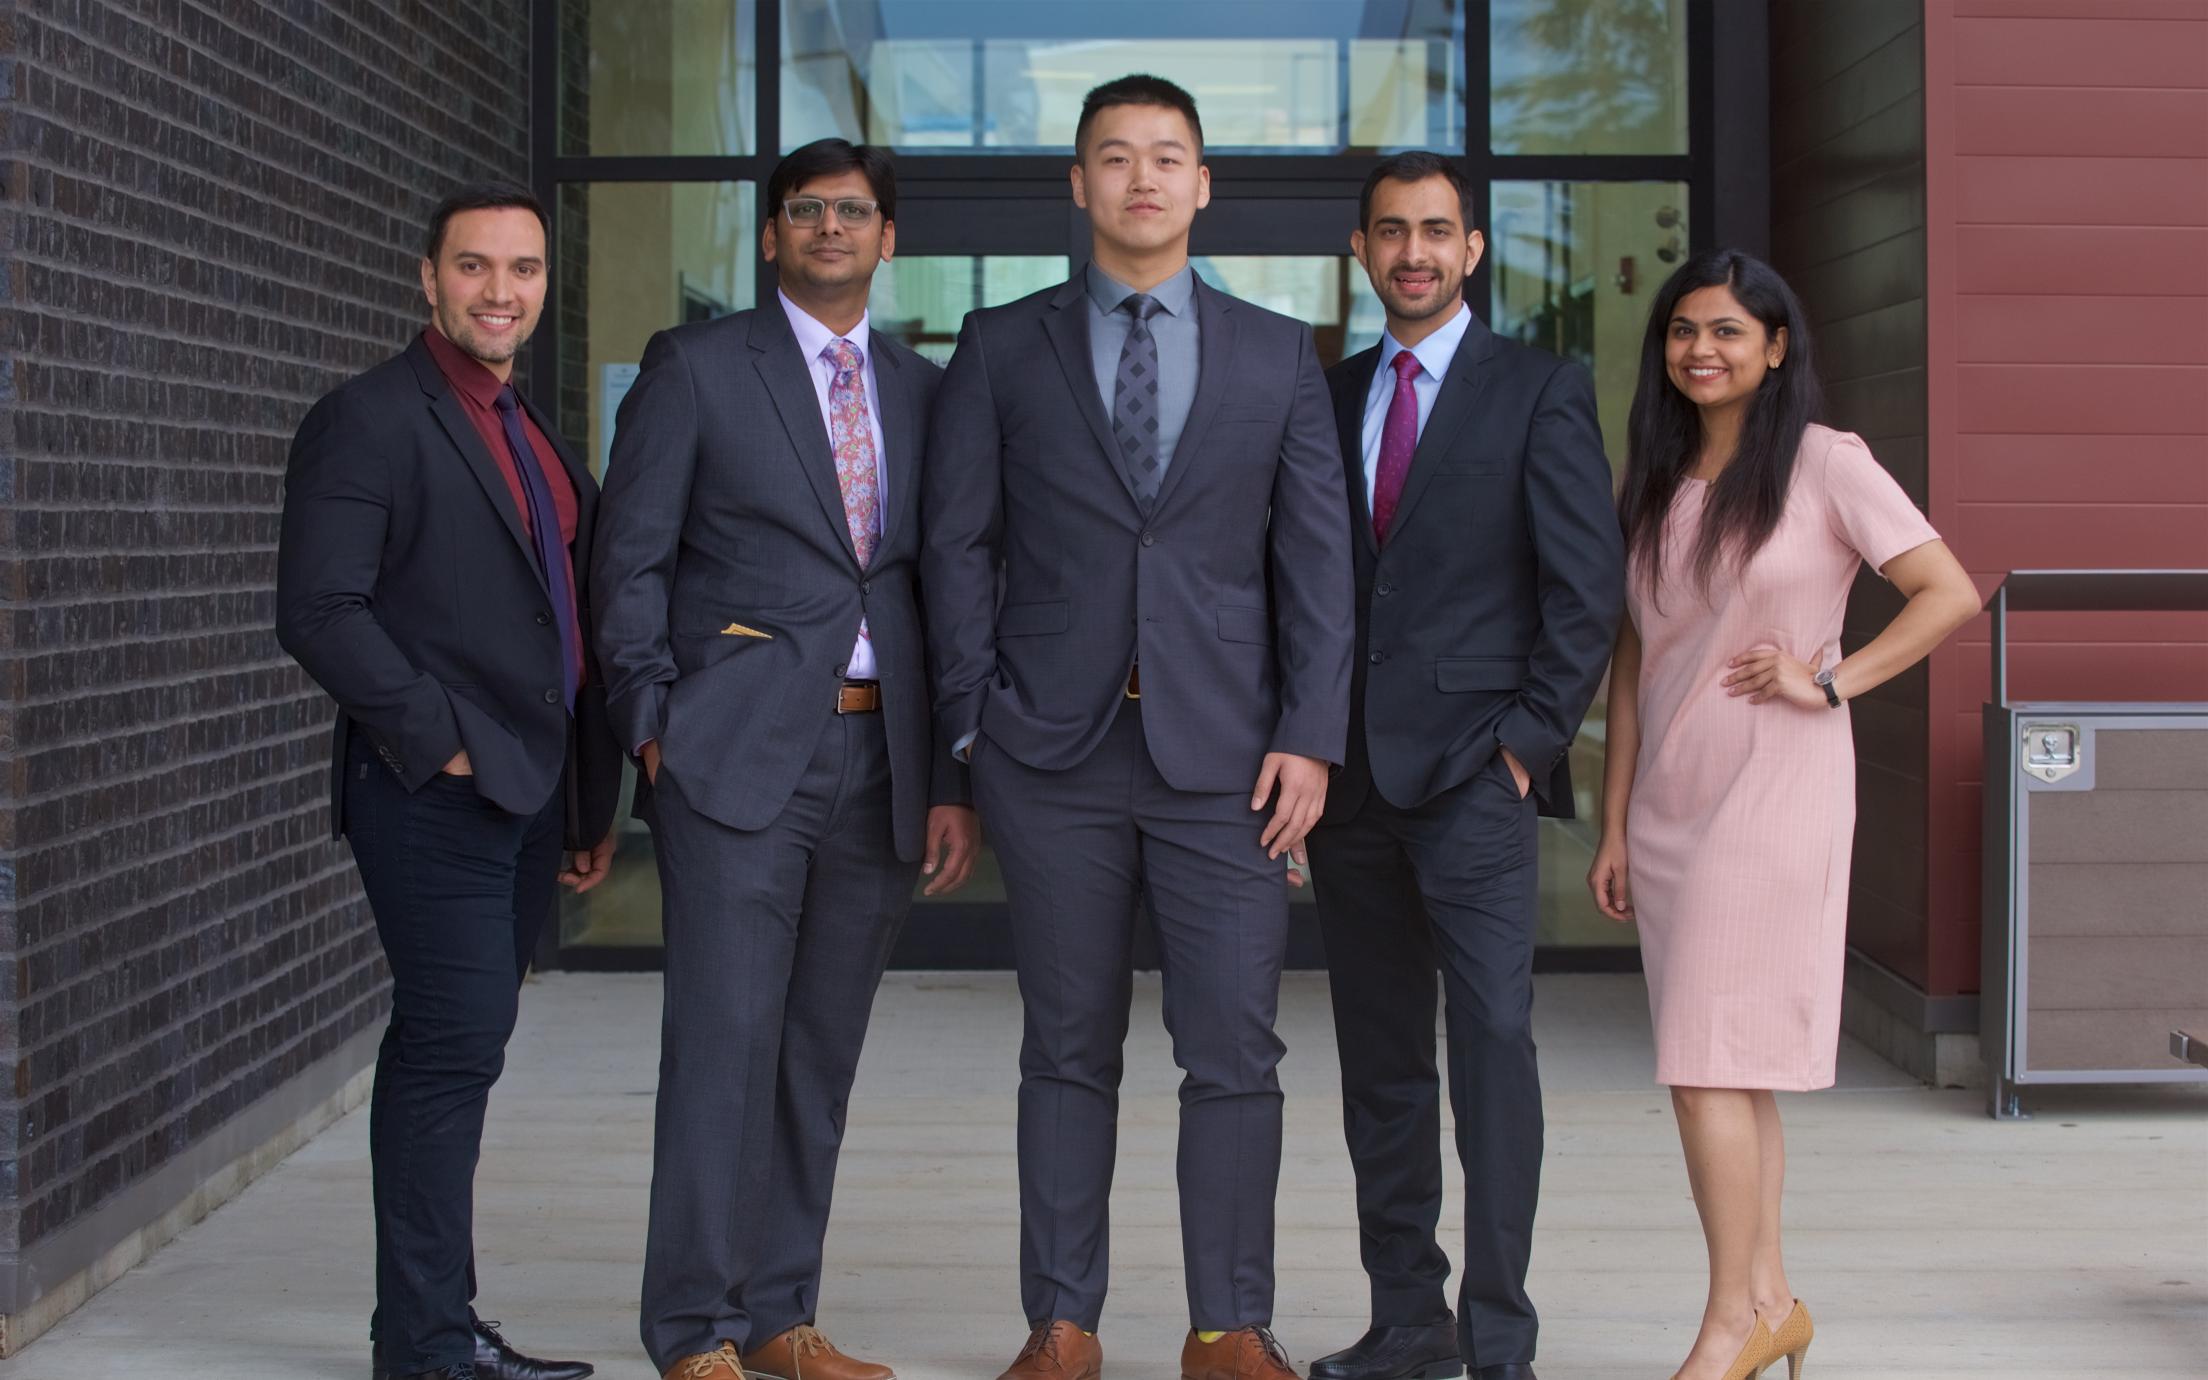 A group of MBA students in business attire poseing for a picture